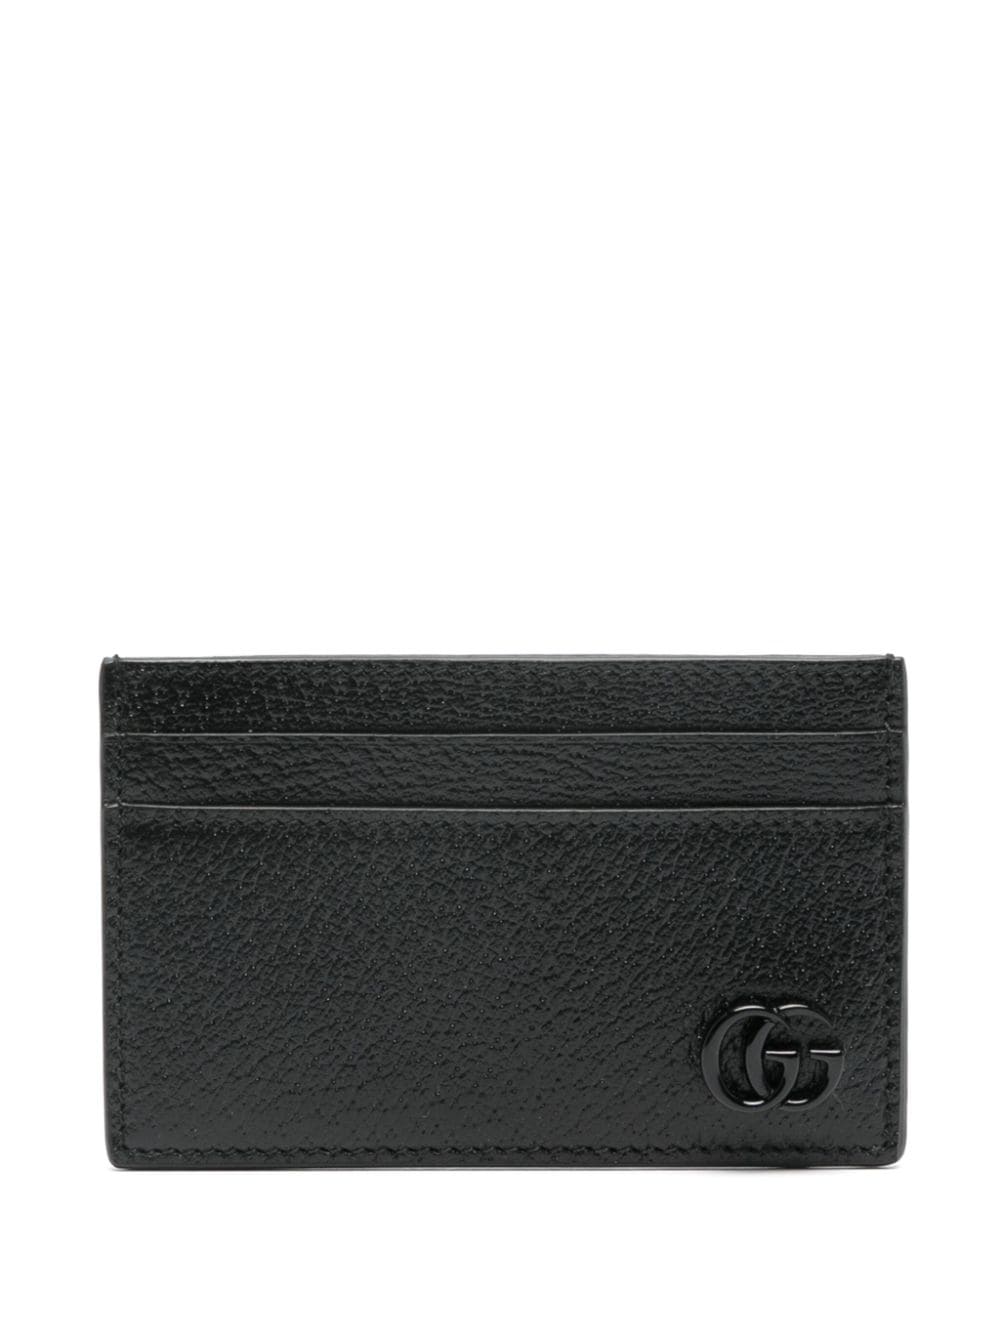 Image 1 of Gucci GG Marmont leather card holder